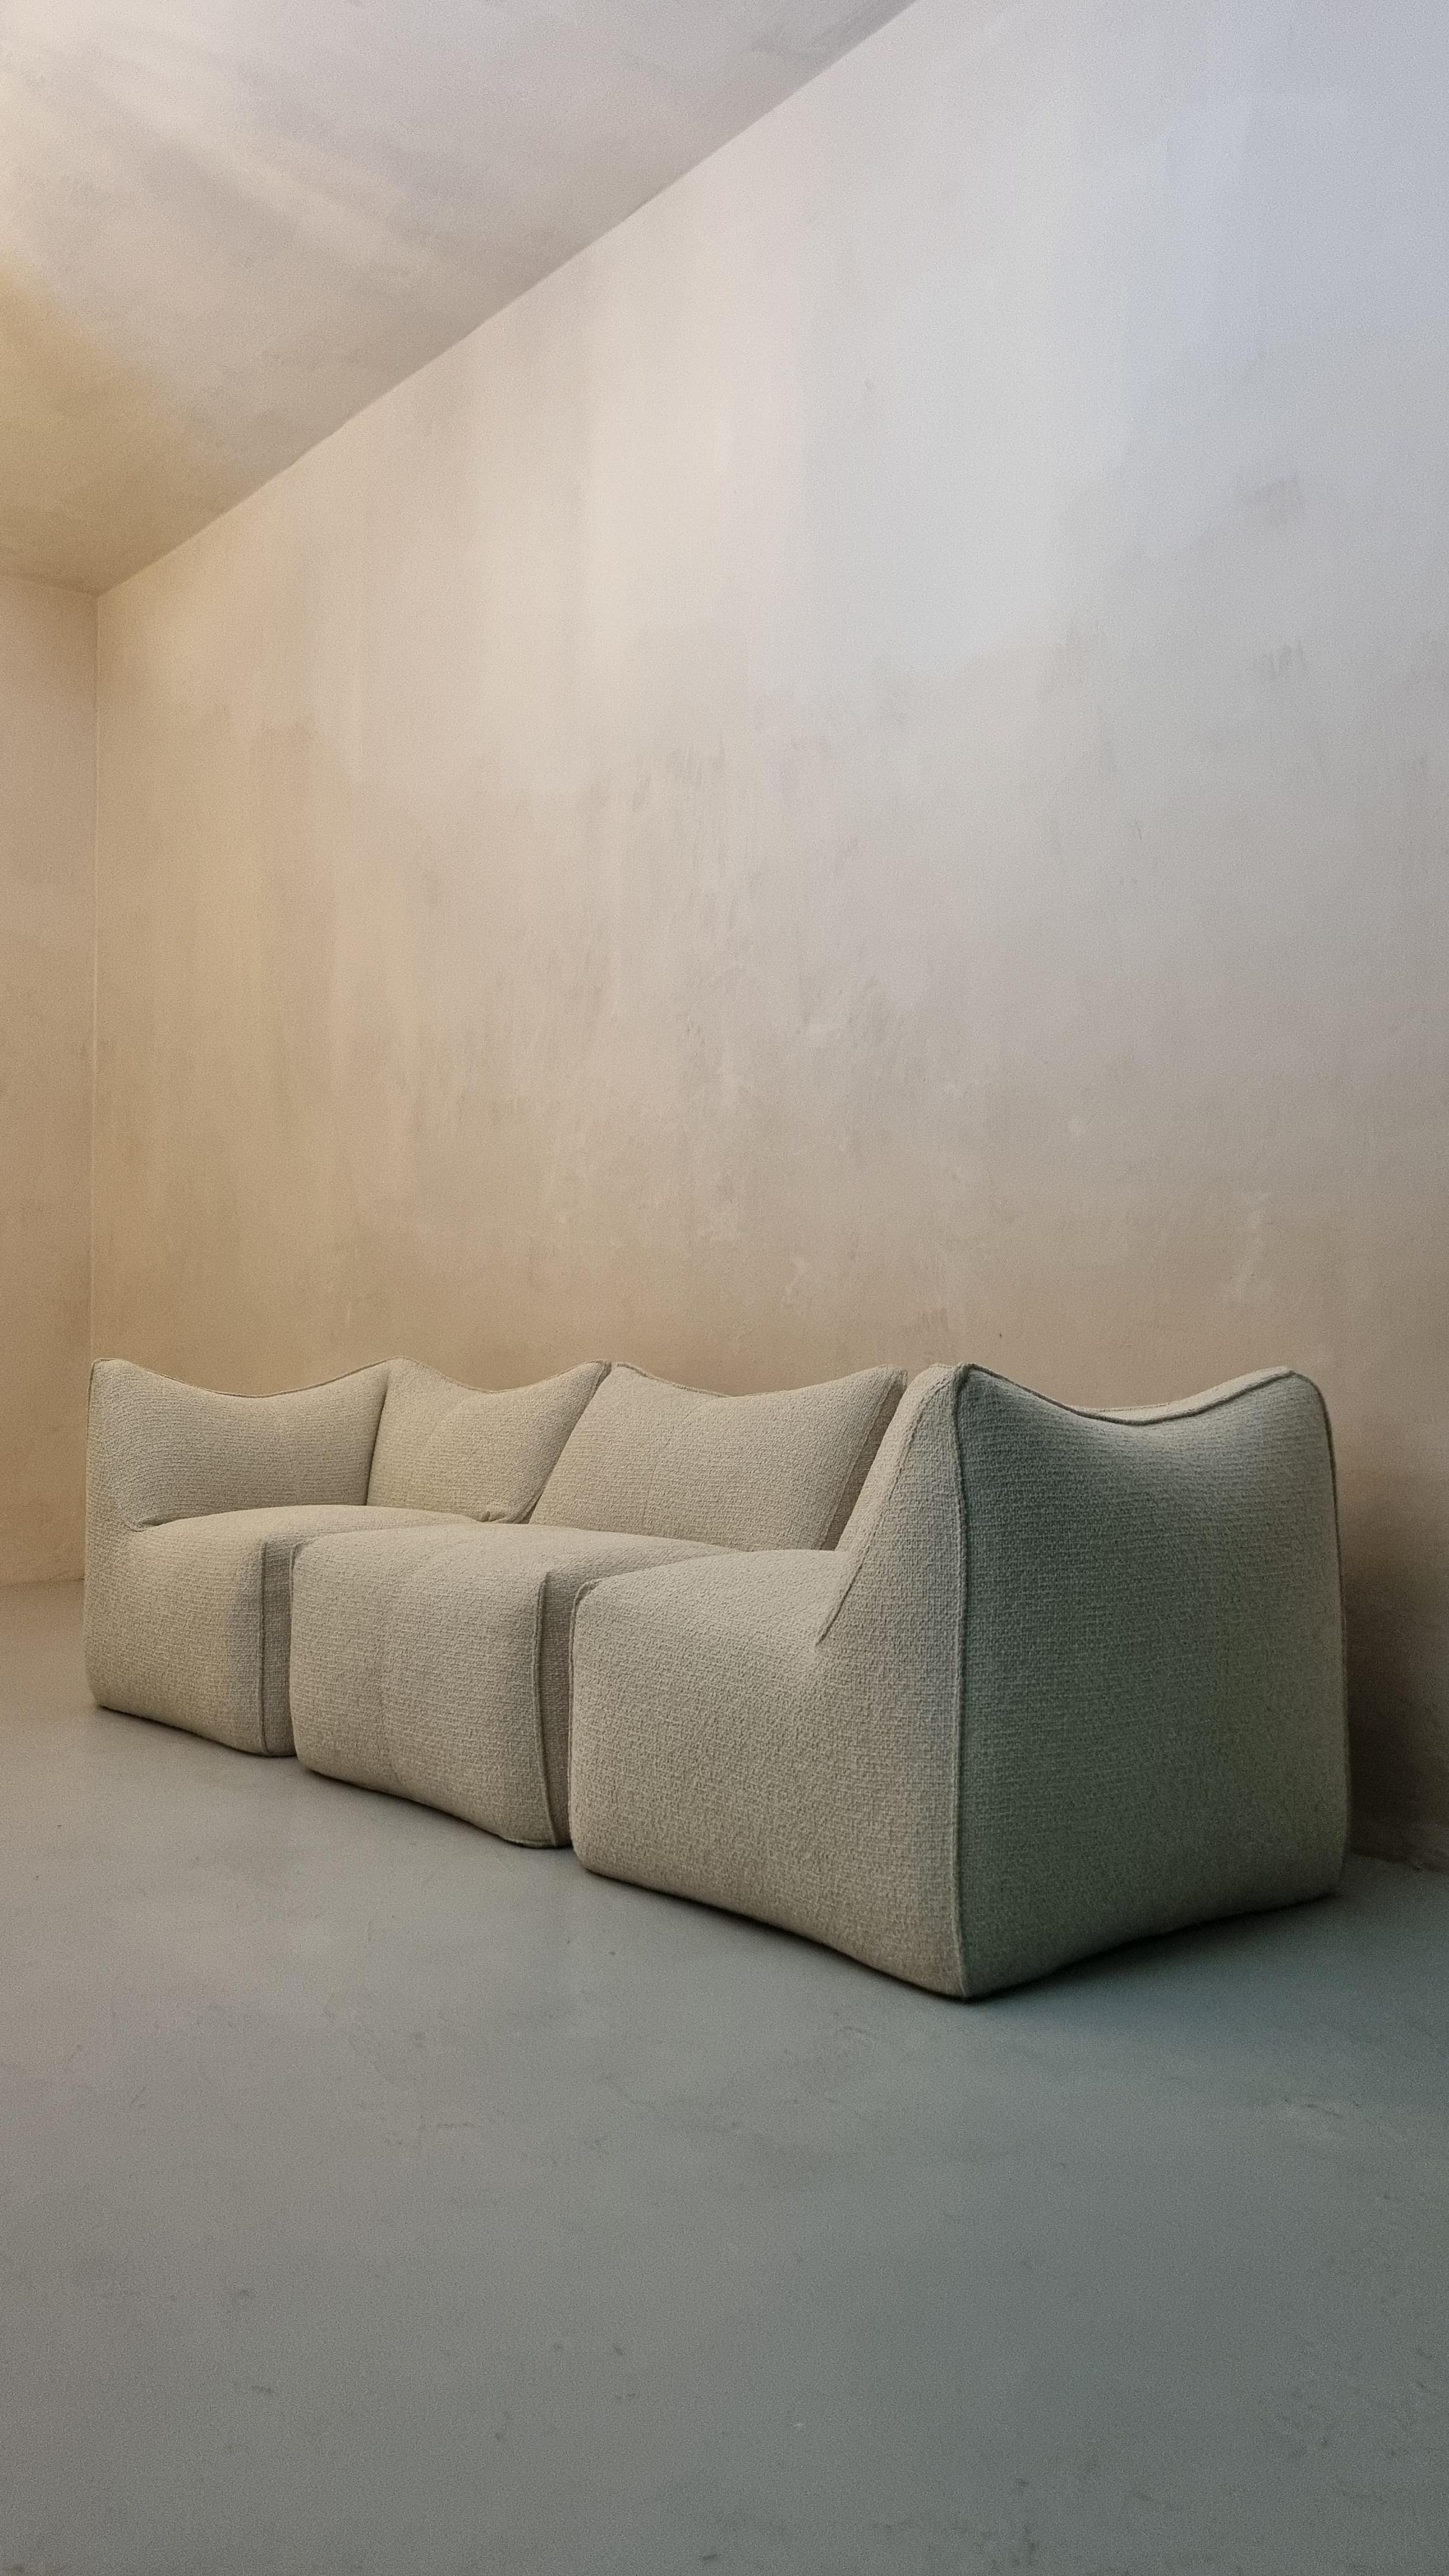 Le Bambole 3 seats sofa designed by Mario Bellini for B&b Italia , the Bambole series won the Compasso d'Oro award in 1979, reupholster in bouclè fabric, Le Bambole is an iconic piece of Italian design.   included in the permanent collection of the